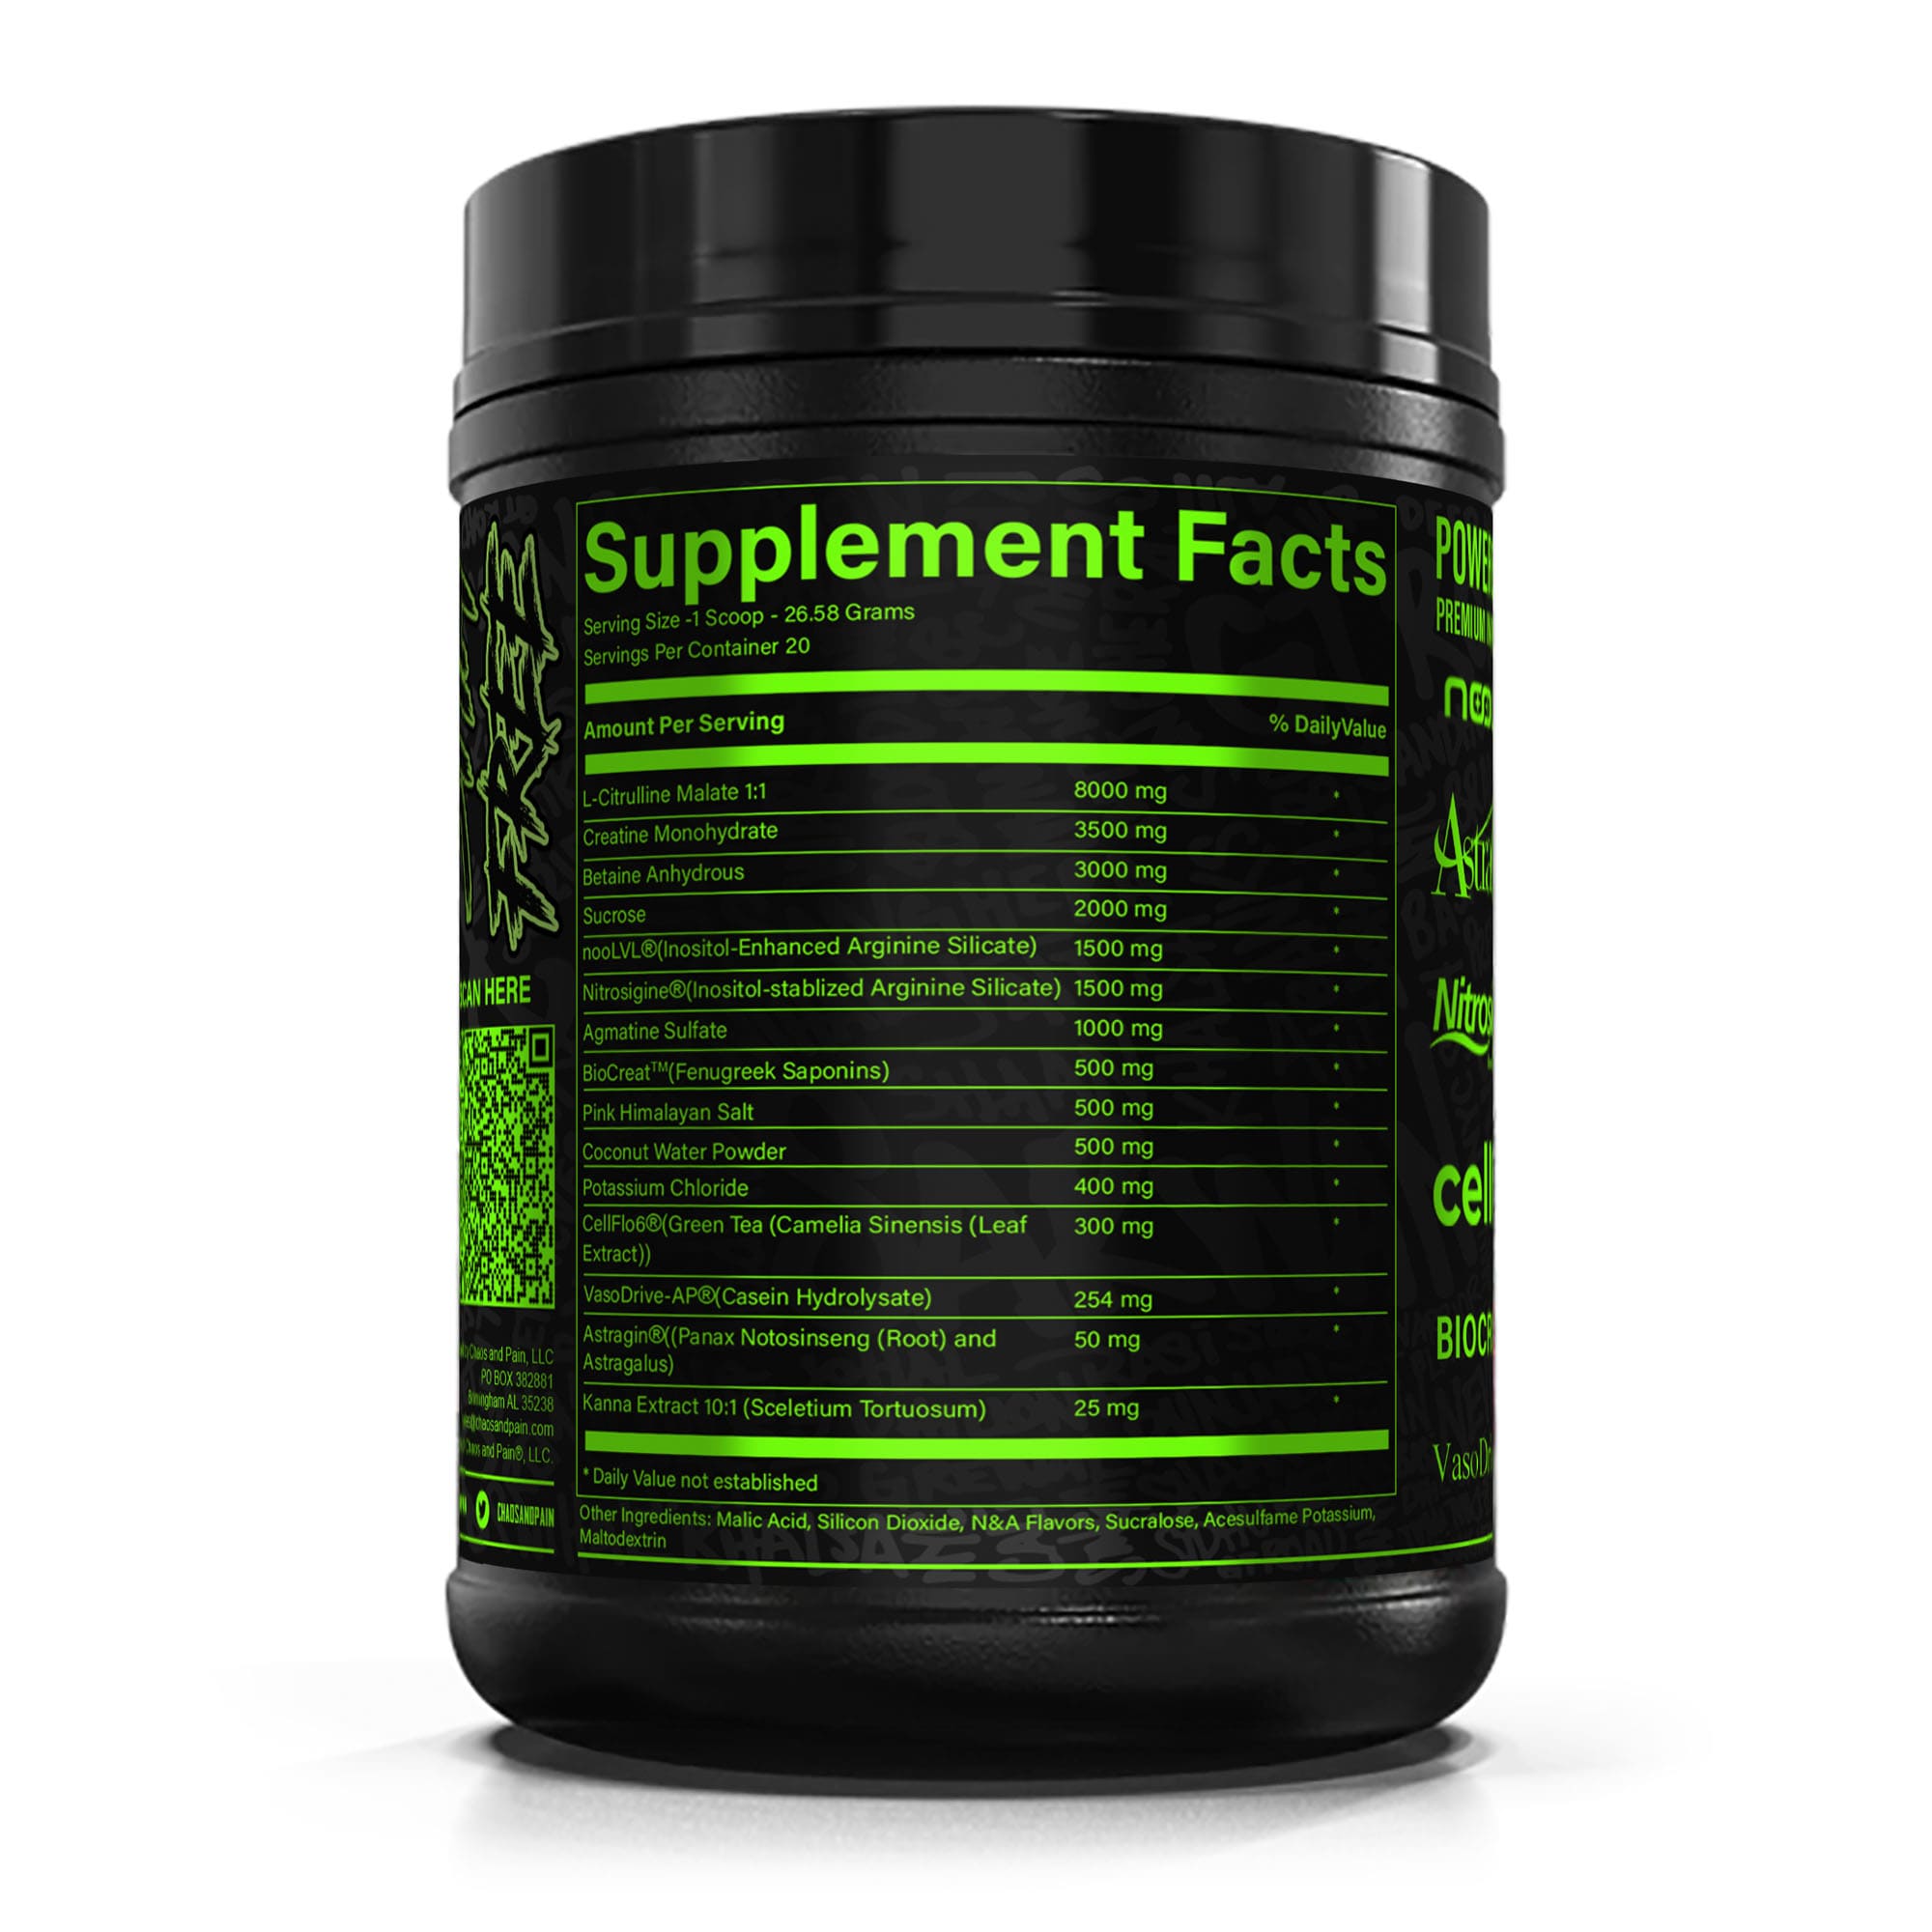 supplement facts bottle perma